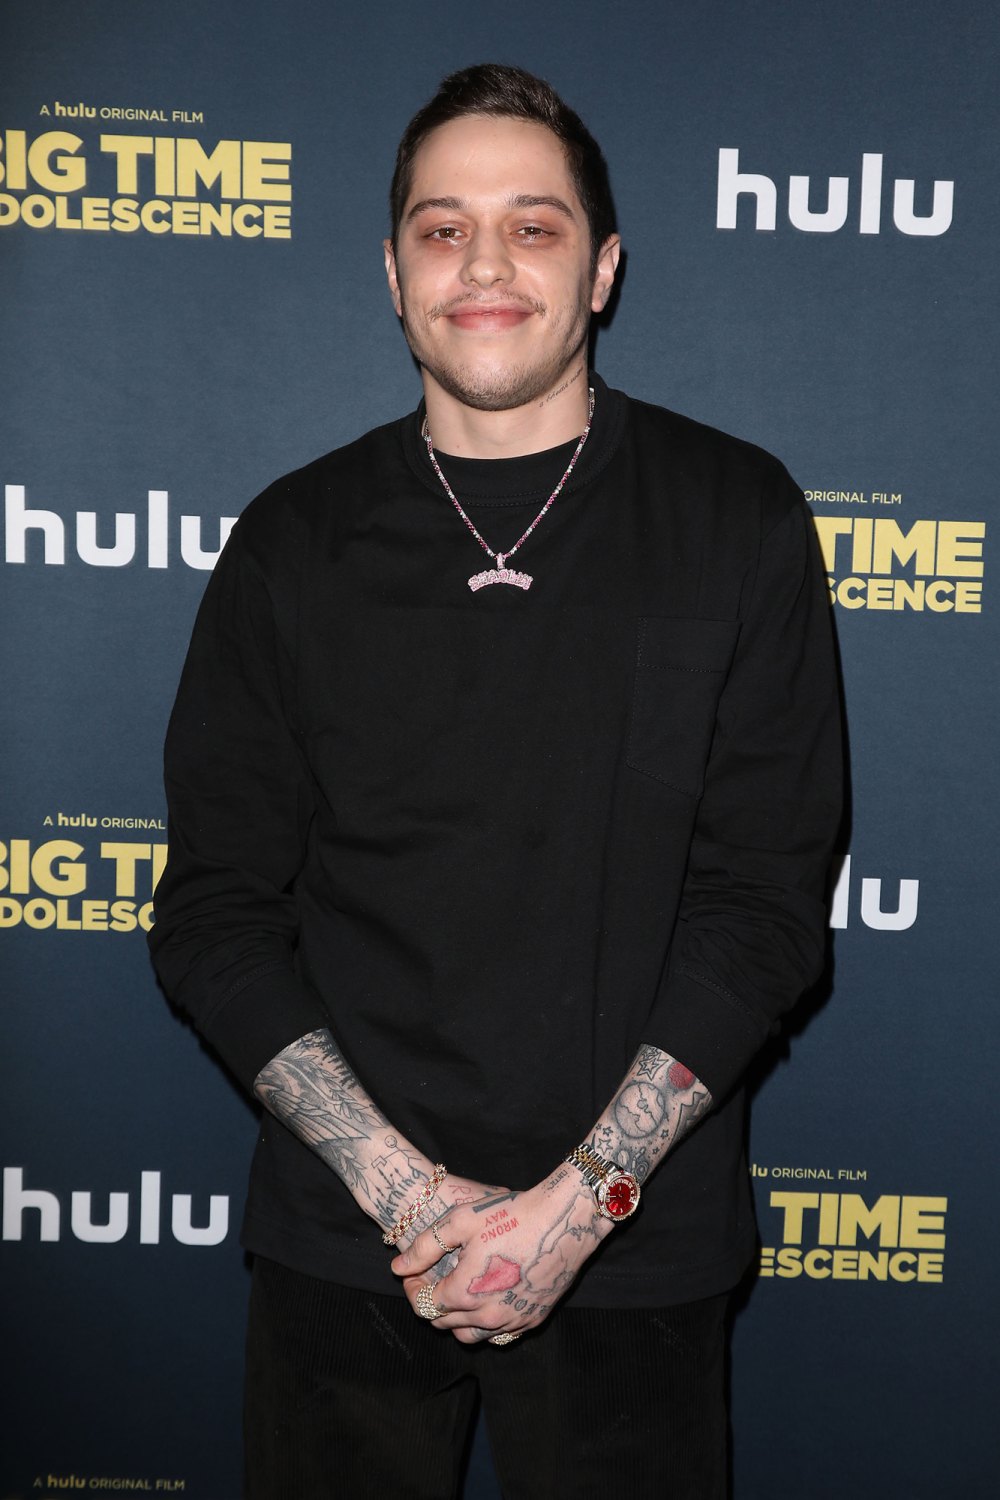 Pete Davidson Marks Return to Stand-Up After Reported Rehab Stay